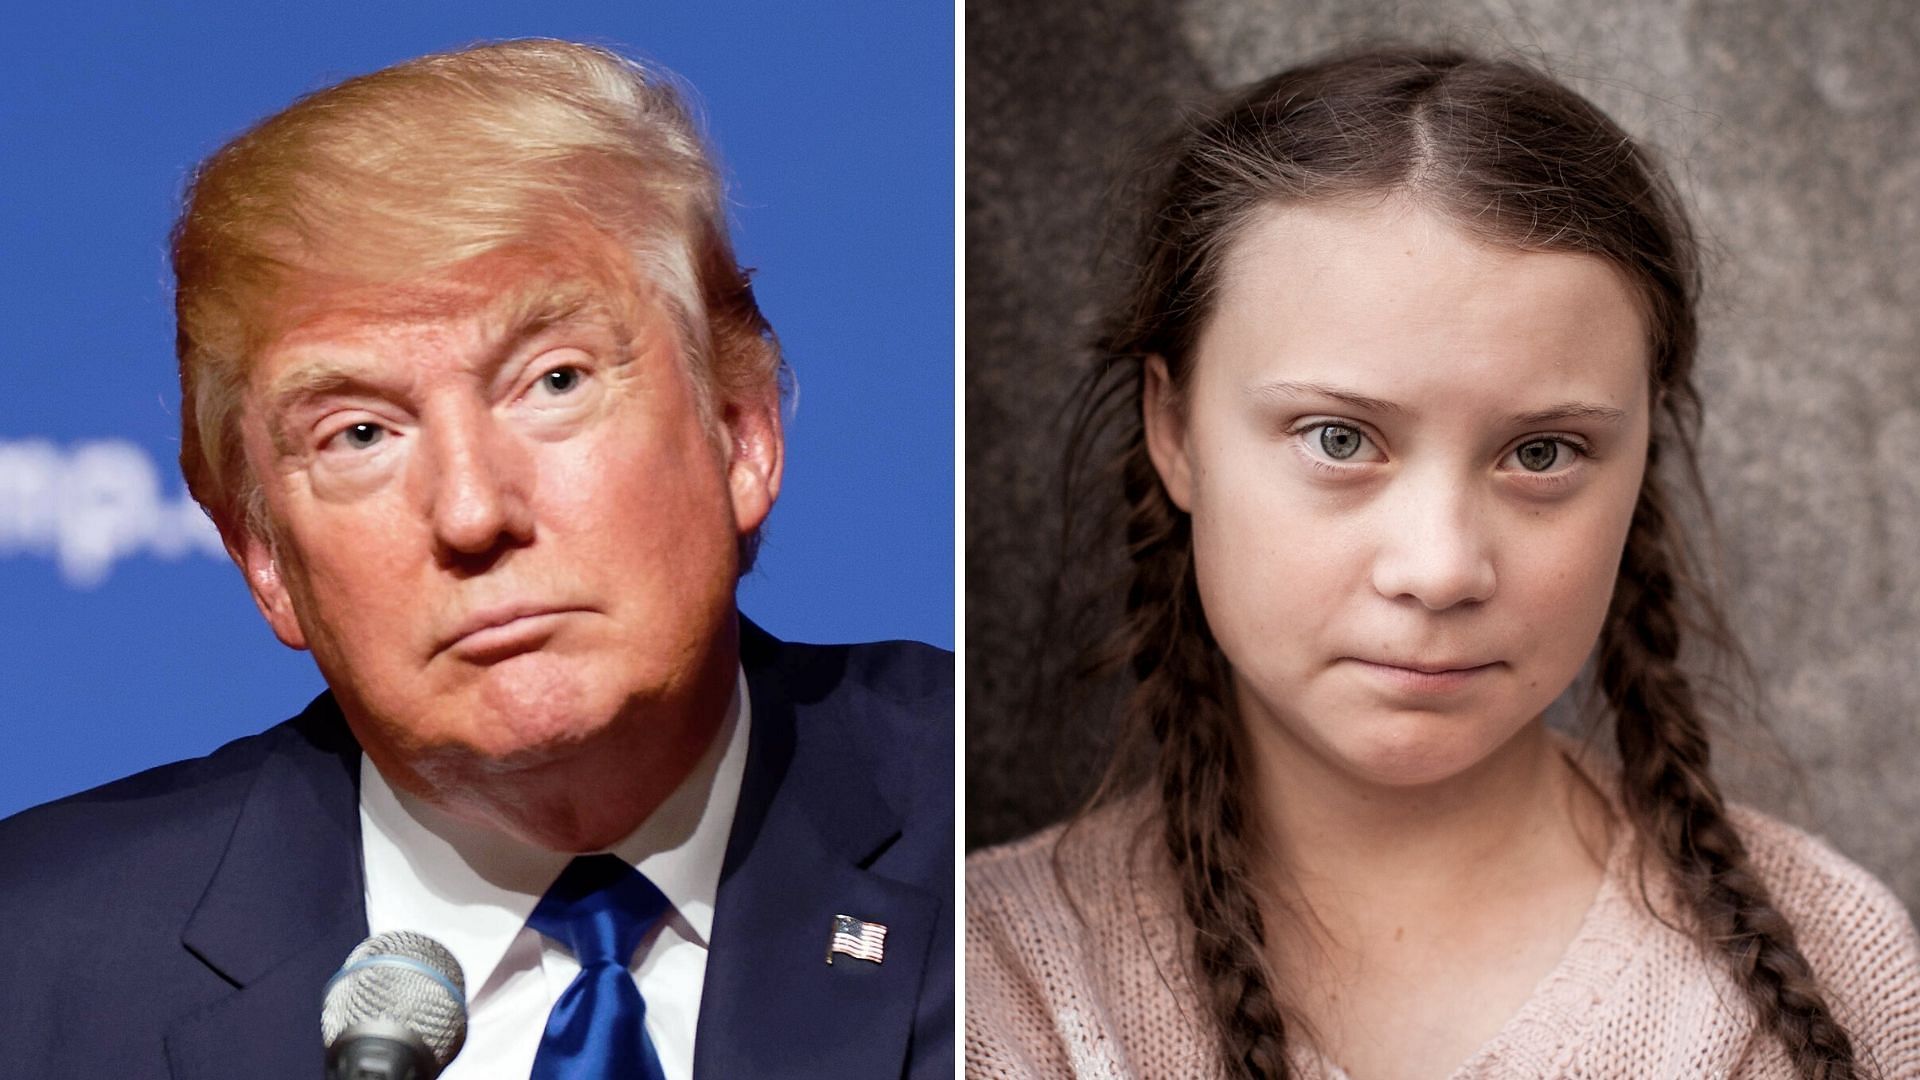 President Donald Trump lashed out at 16-year-old climate activist Greta Thunberg on Thursday, 12 December.&nbsp;